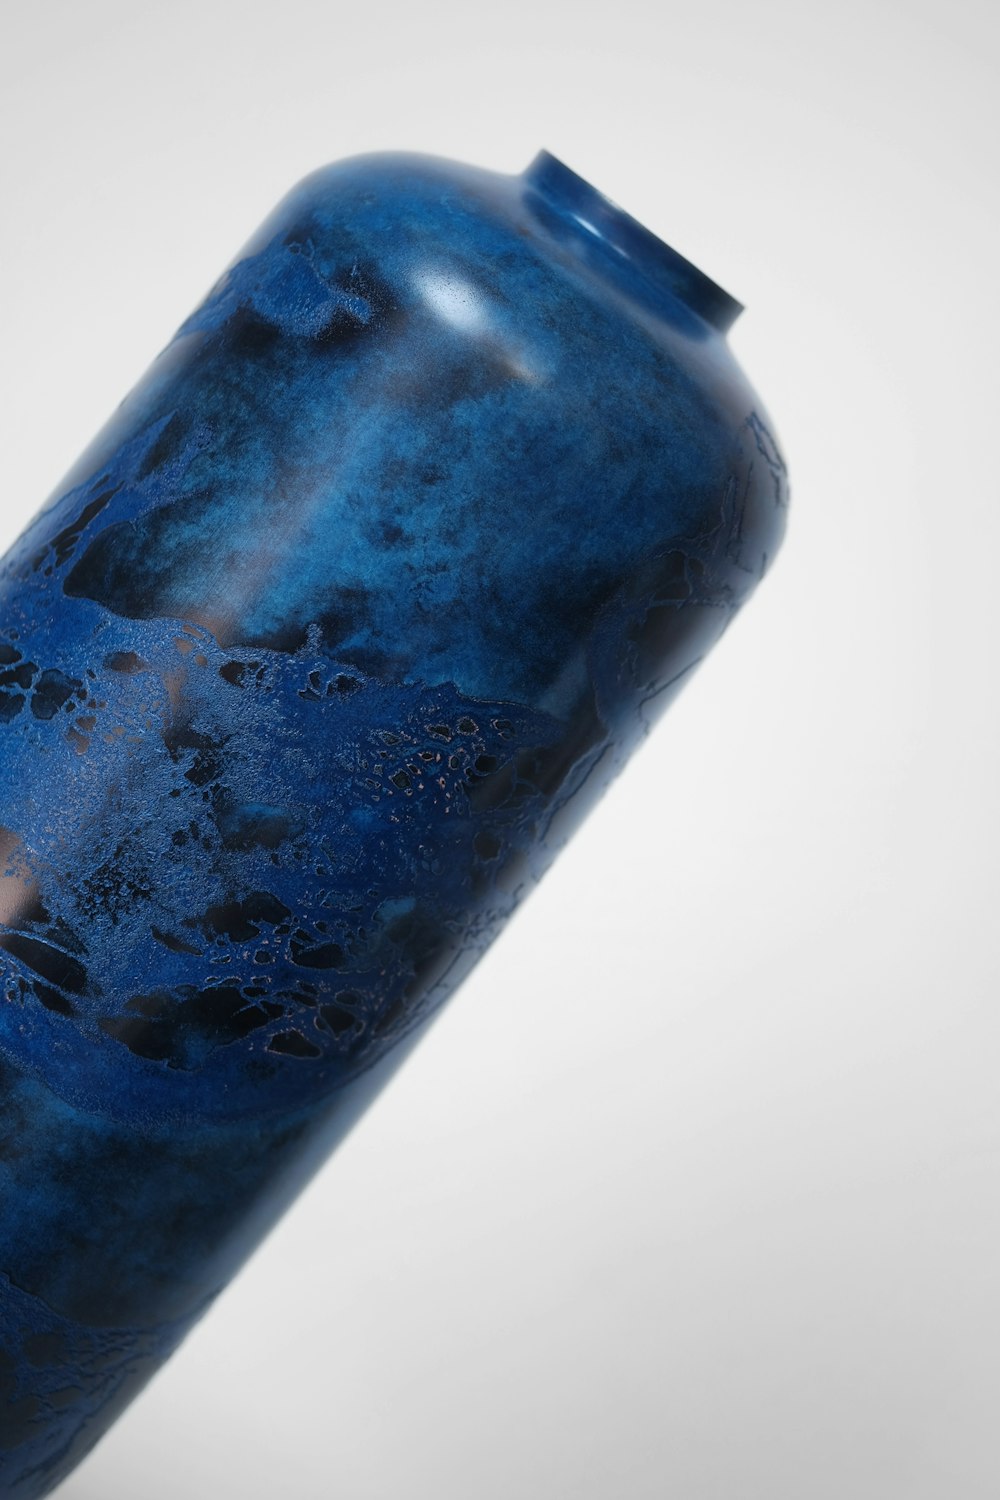 blue and white ice in clear plastic bottle